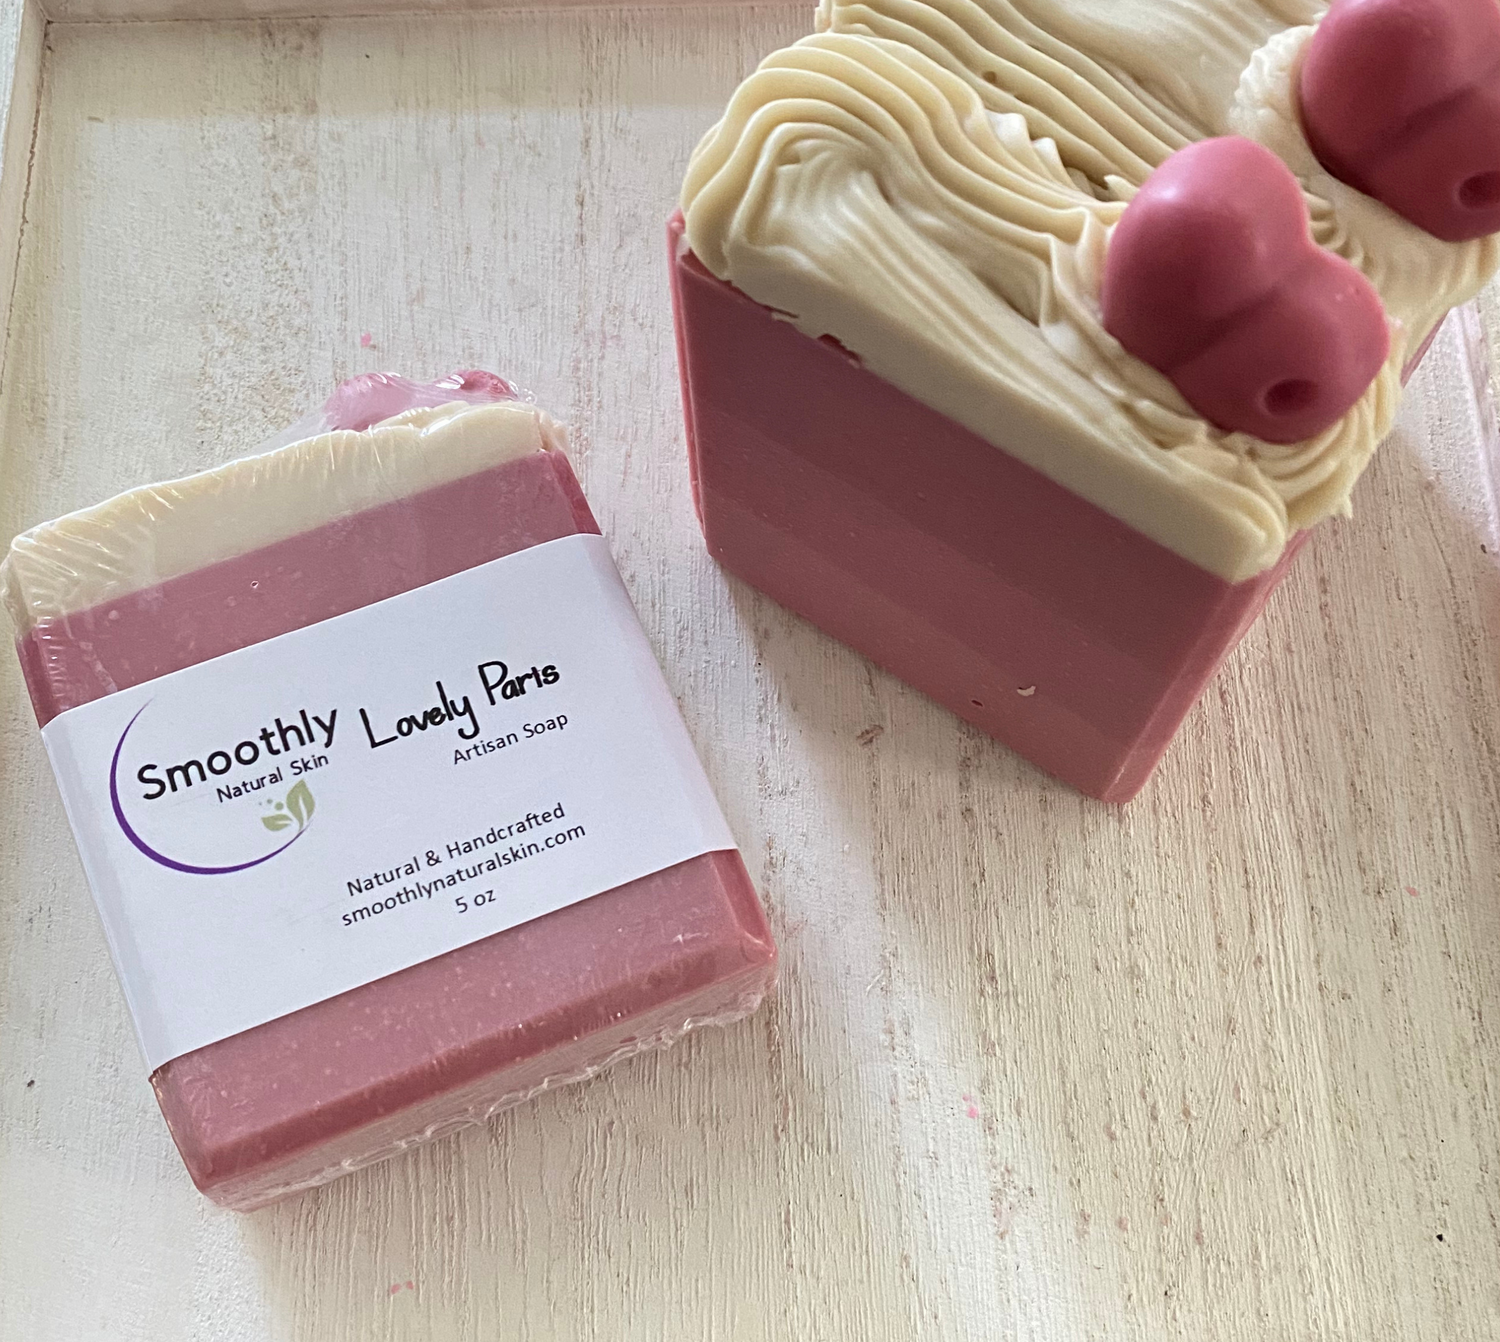 Lovely Paris Soap is a very feminine fragrance. This soap has a very sweet floral scent with a touch of citrus and musk.  Smoothly Natural Skin 